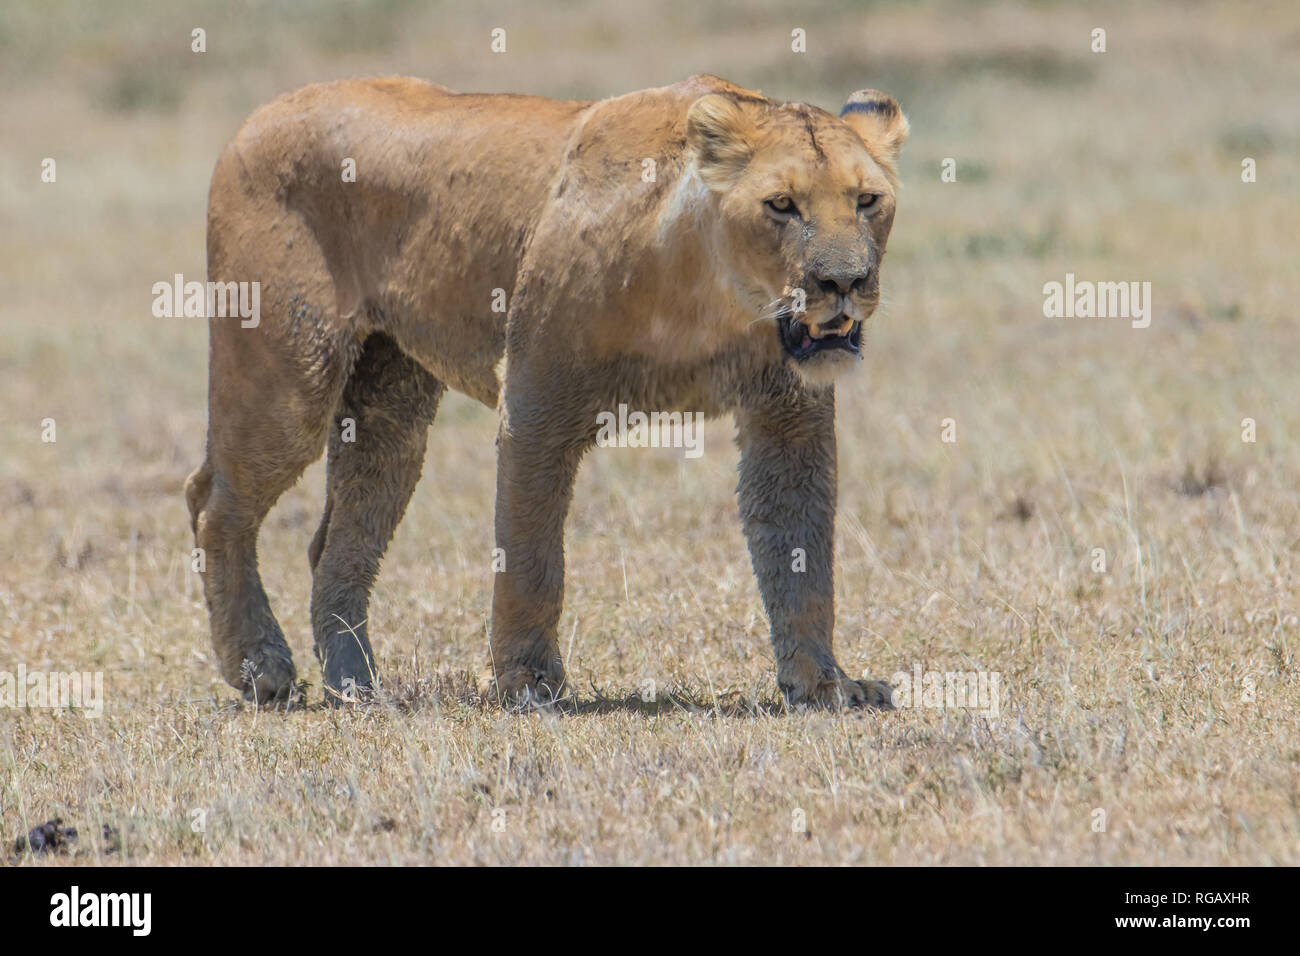 Lioness stands on the groun Stock Photo